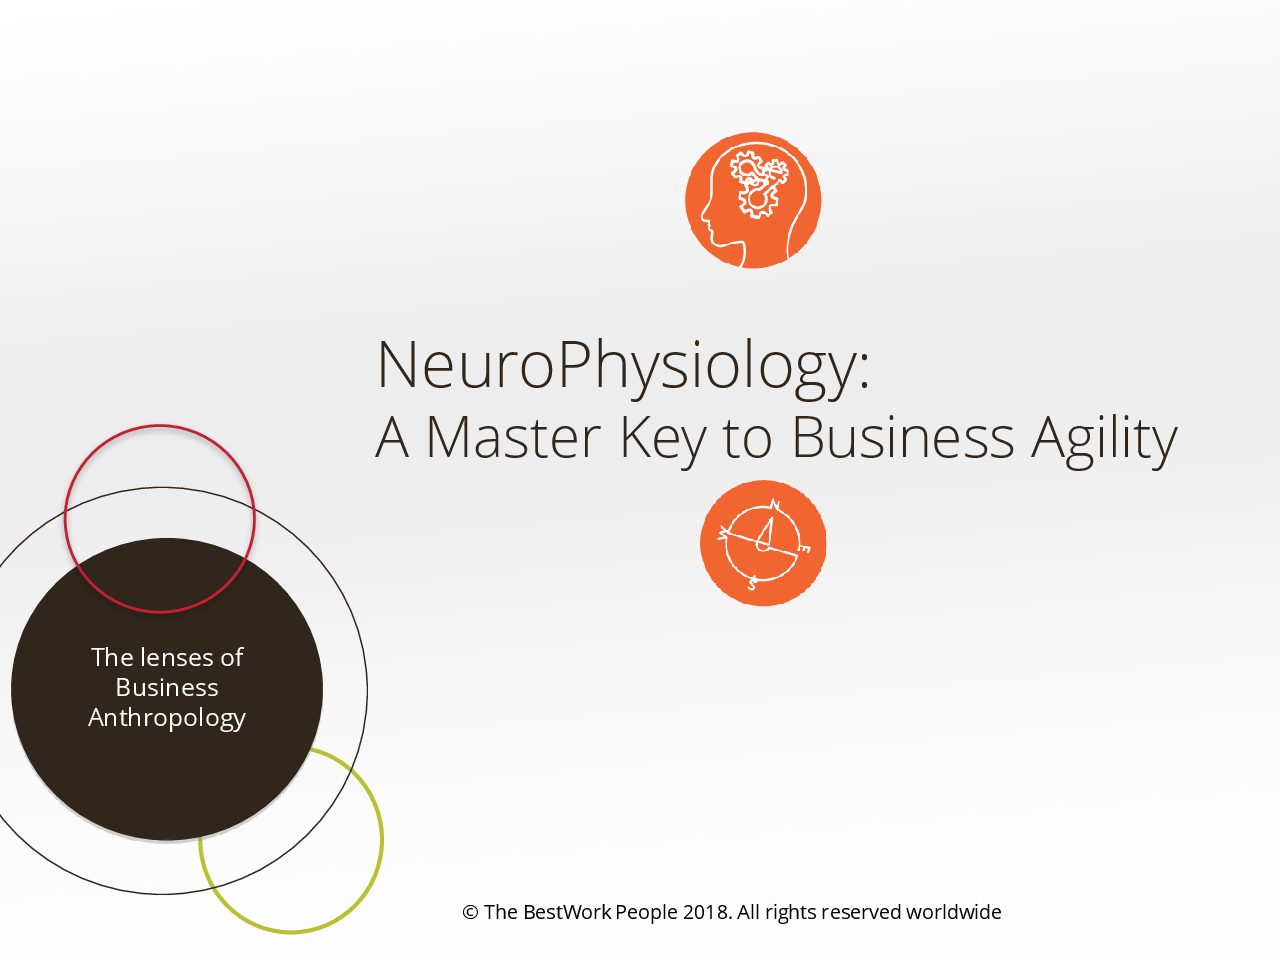 NeuroPhysiology: a Master Key to Business Agility